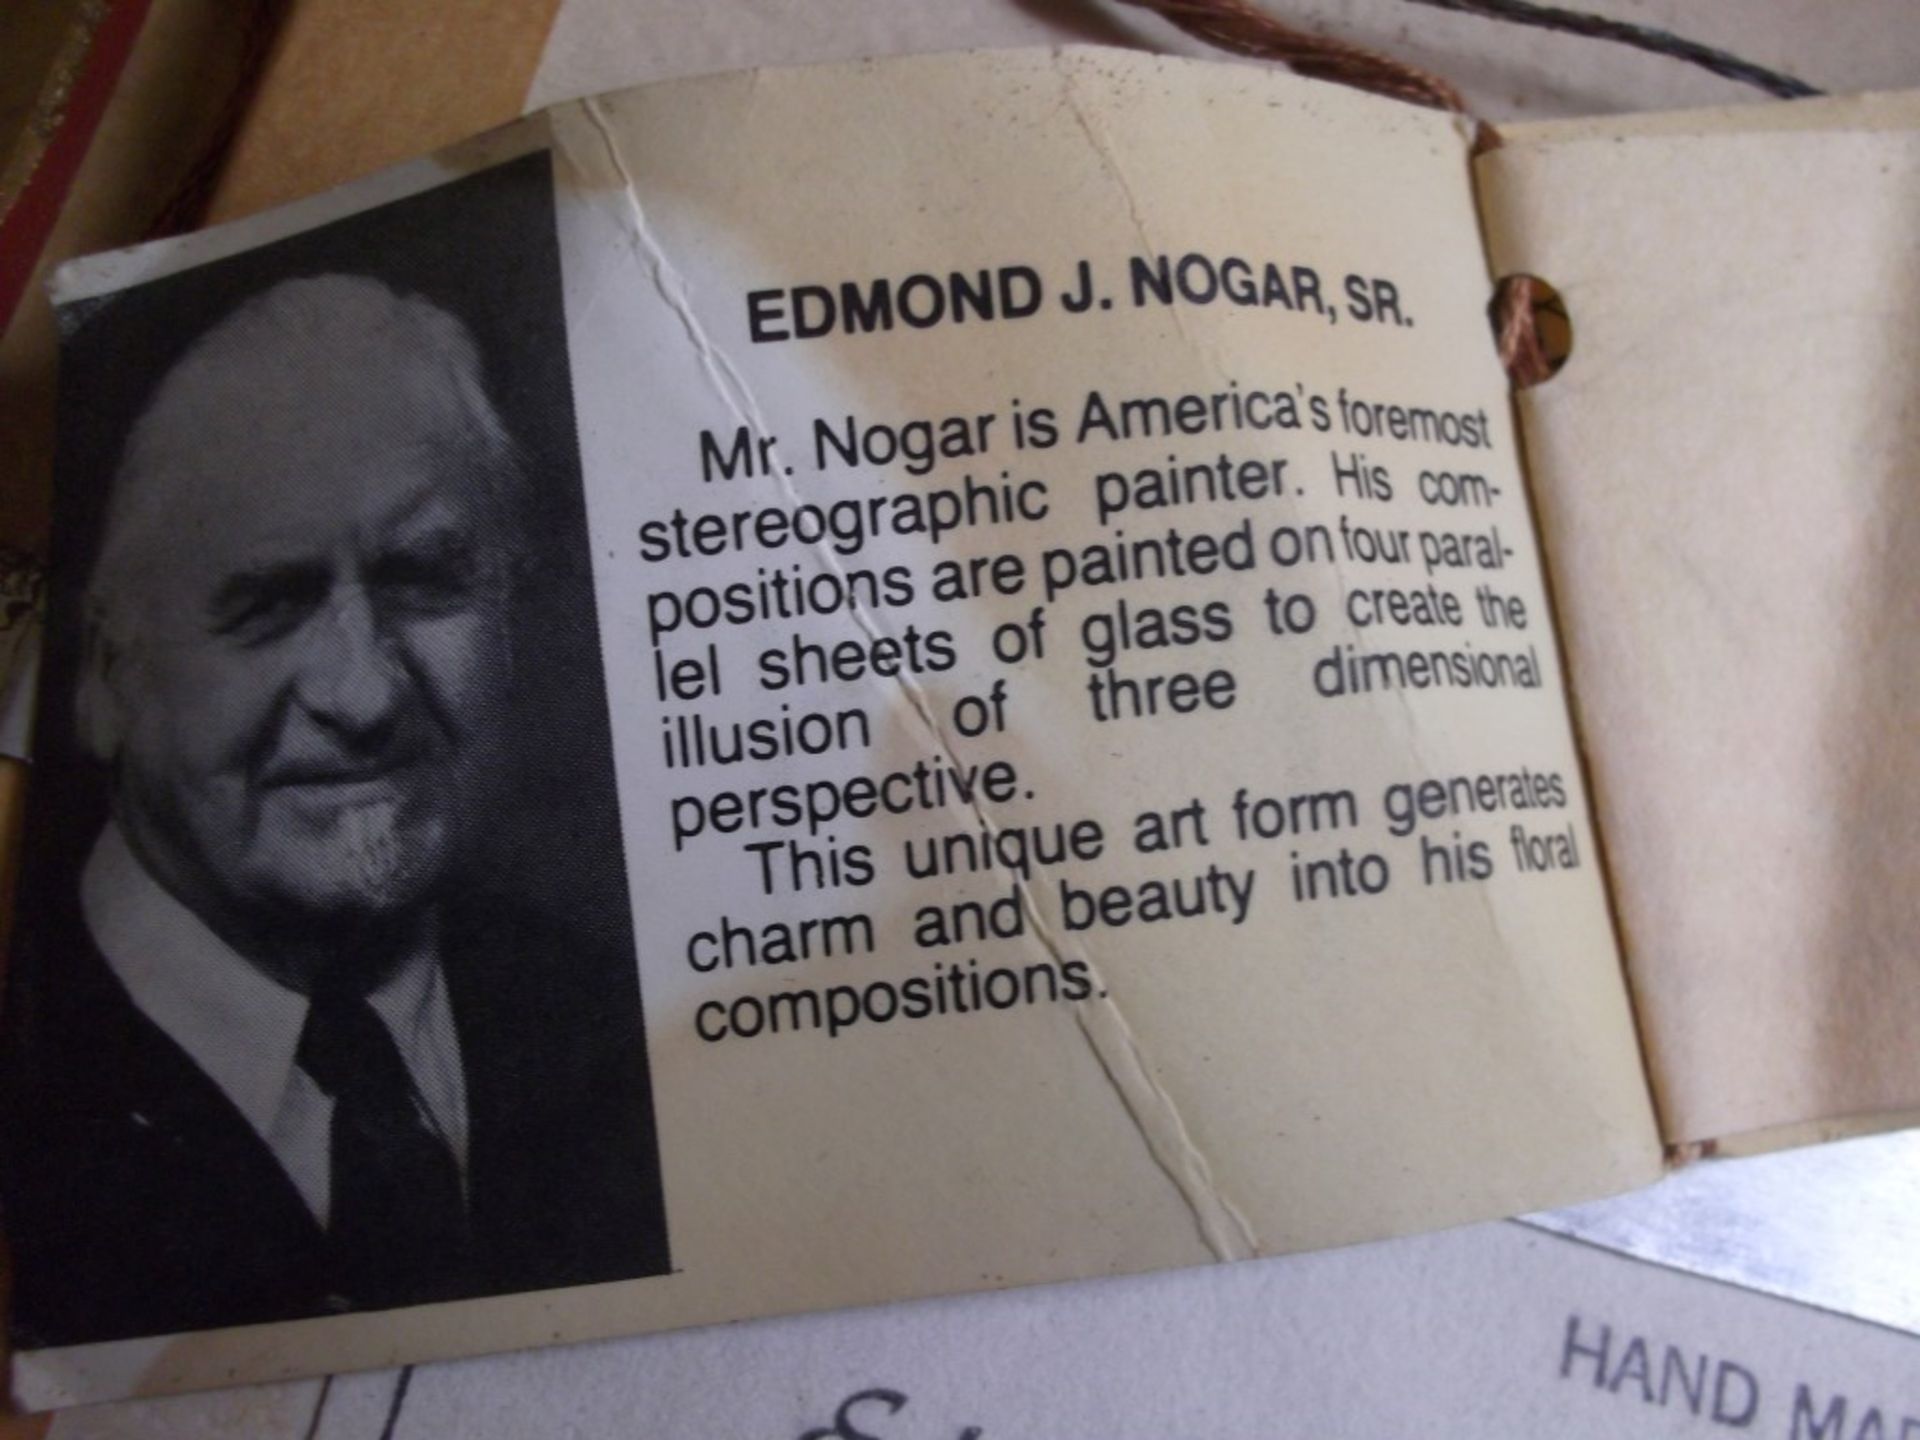 1 x Original Edmond J. Nogar Stereographic Oil Painting - Hand Signed by Artist, With - Image 7 of 7